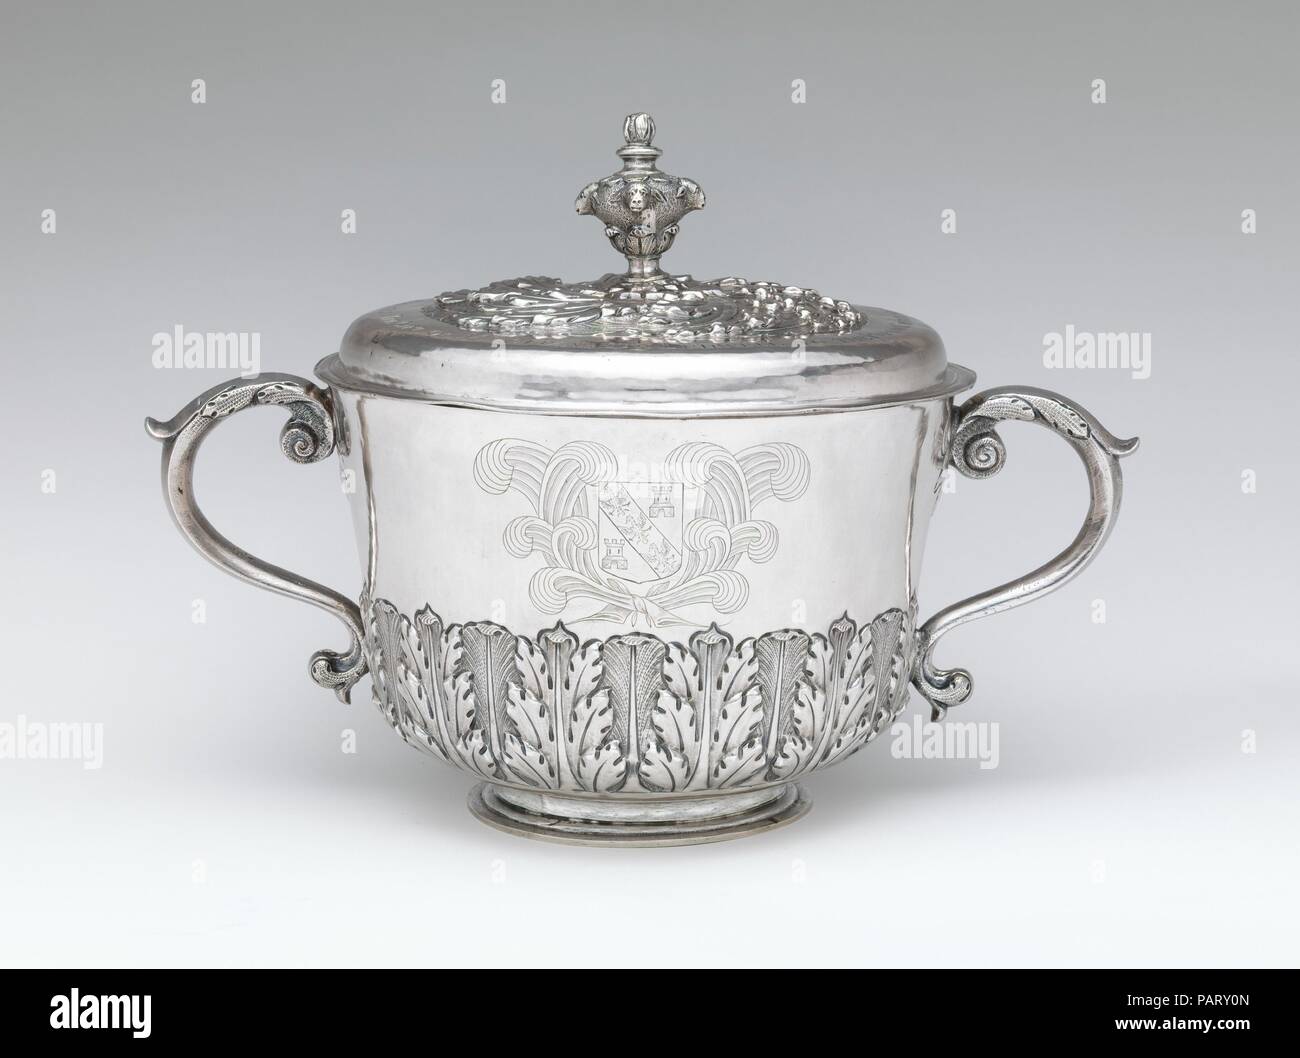 Two-handled cup with cover. Culture: British, London. Dimensions: Overall (confirmed): 9 9/16 x 13 1/2 x 8 7/8 in. (24.3 x 34.3 x 22.5 cm). Maker: I H (British, mid-late 17th century). Date: 1676/77.  This cup originally was made for use in a private home--perhaps as a 'loving cup'--to be passed among guests or displayed on a sideboard. In 1765, when it would have seemed distinctly old fashioned, it was bequeathed to the Church of Charing, where it was used as a communion cup. The donor, Elizabeth Ludwell, had her coat of arms engraved on the side and an inscription added to the cover. Museum: Stock Photo